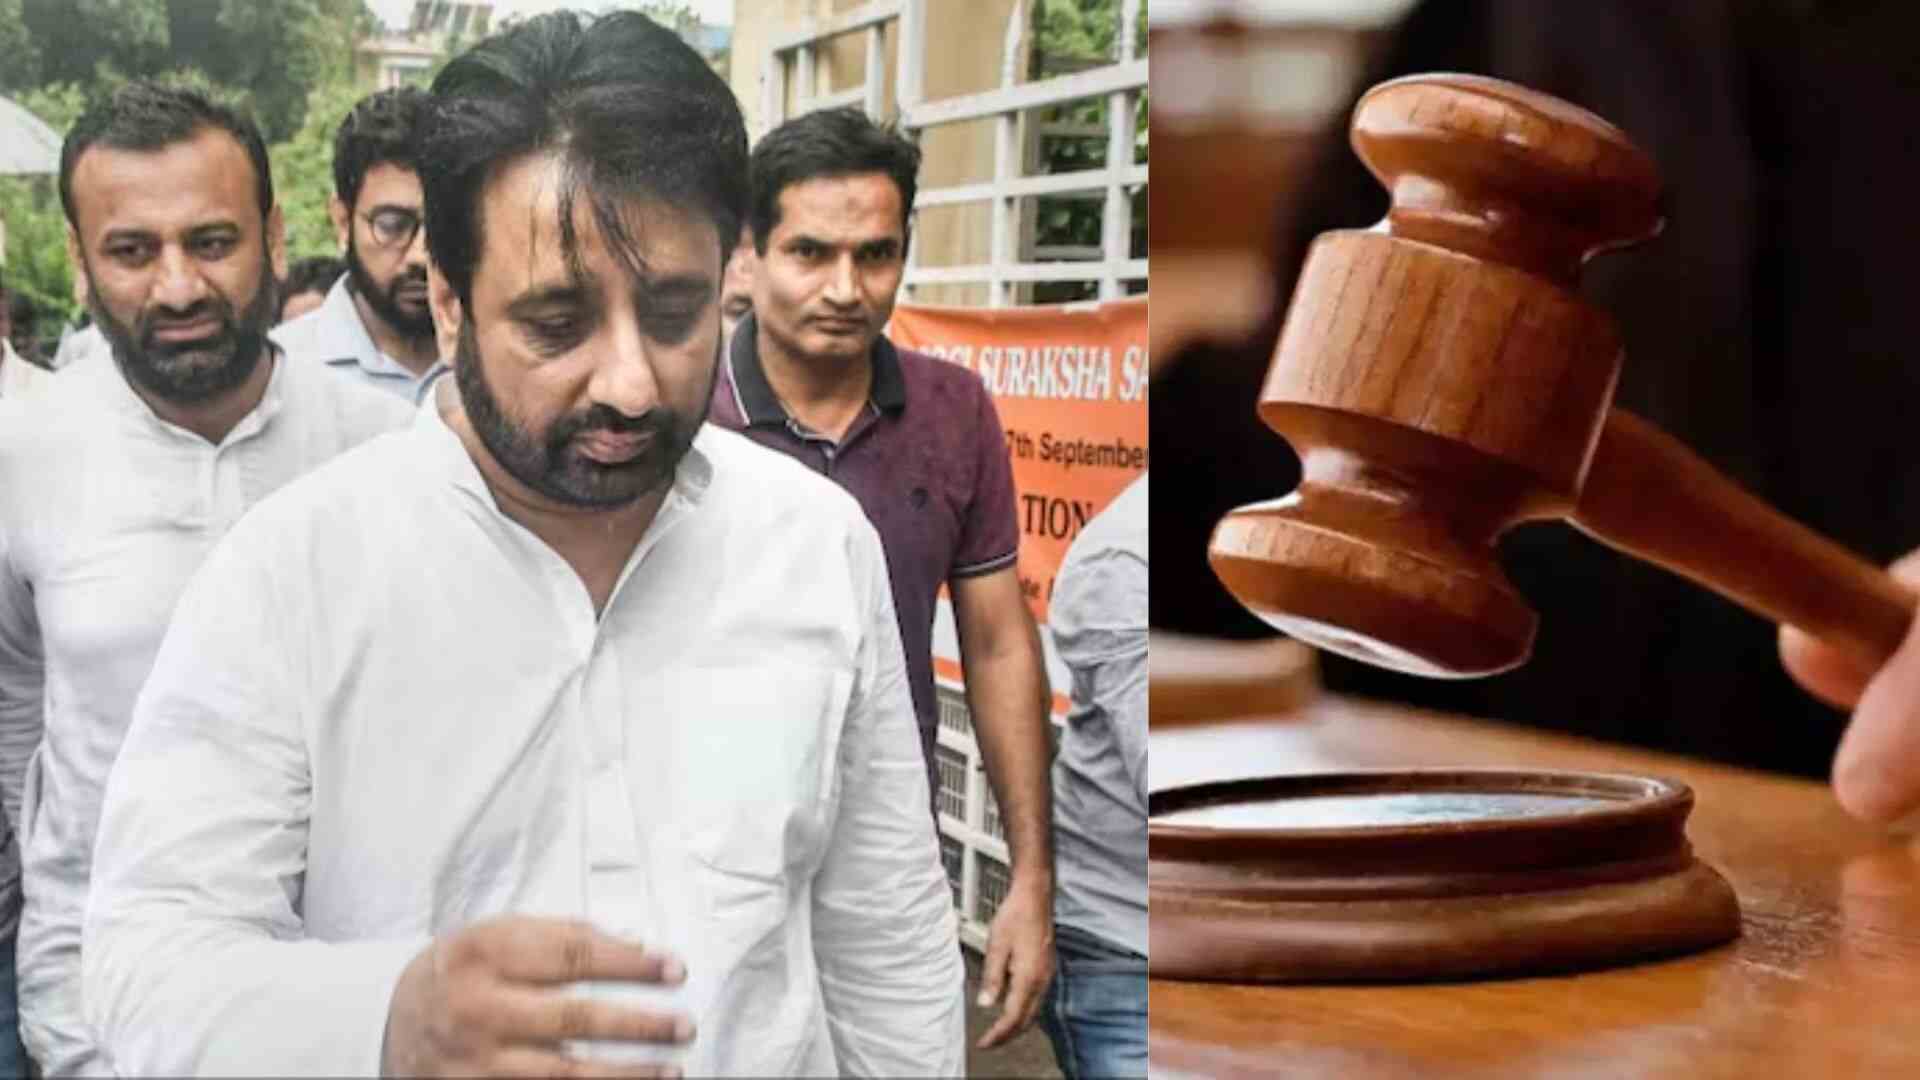 Delhi Waqf Board Scandal: Accused Appeals Bail For Mother’s Hospitalization